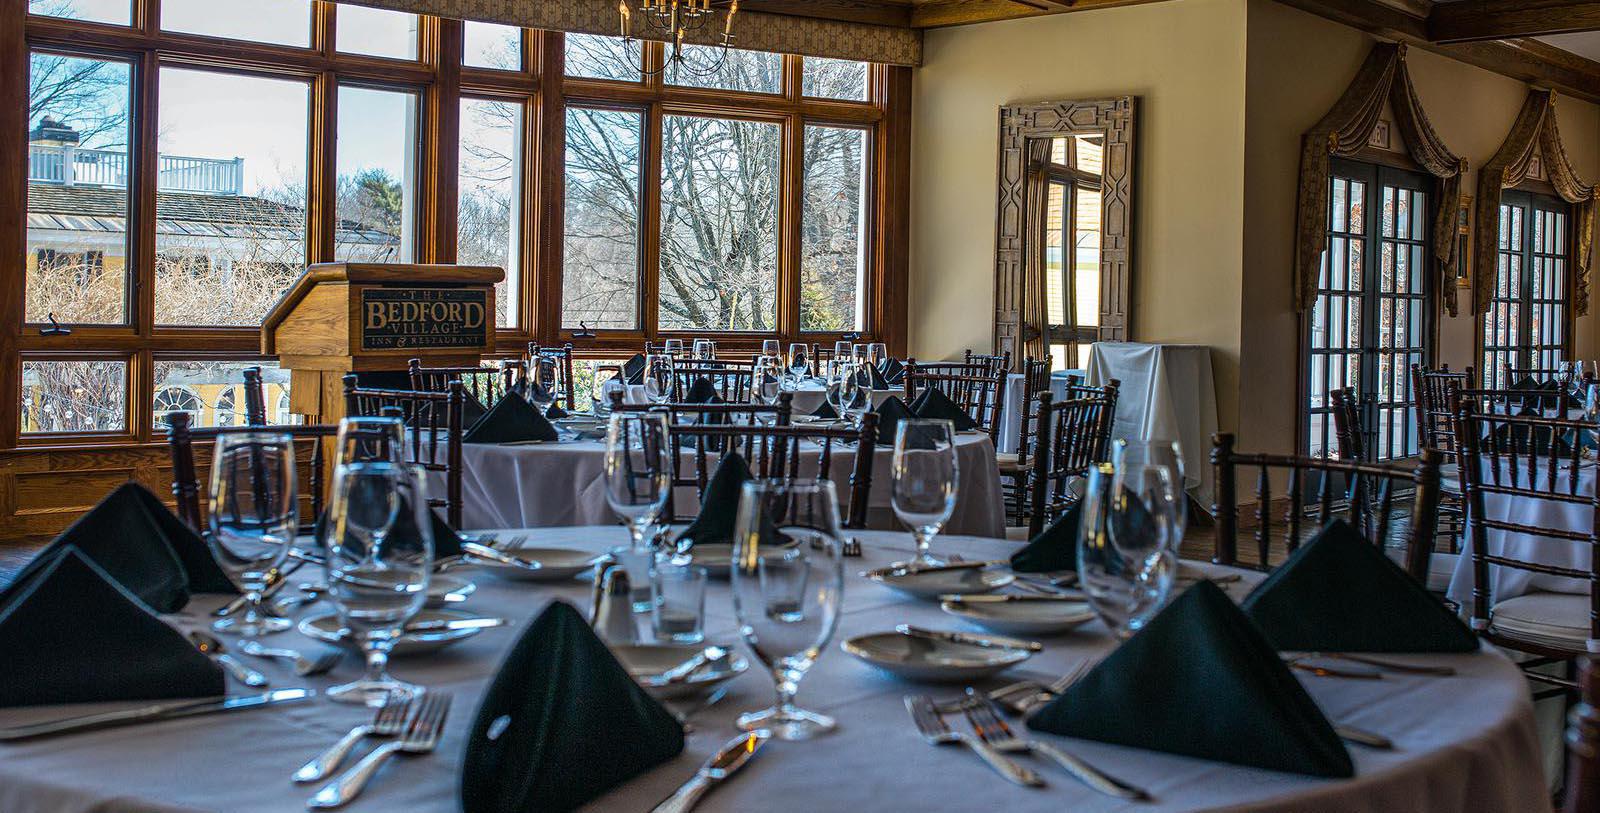 Image of Event Space The Bedford Village Inn, 1810, Member of Historic Hotels of America, in Bedford, New Hampshire, Explore